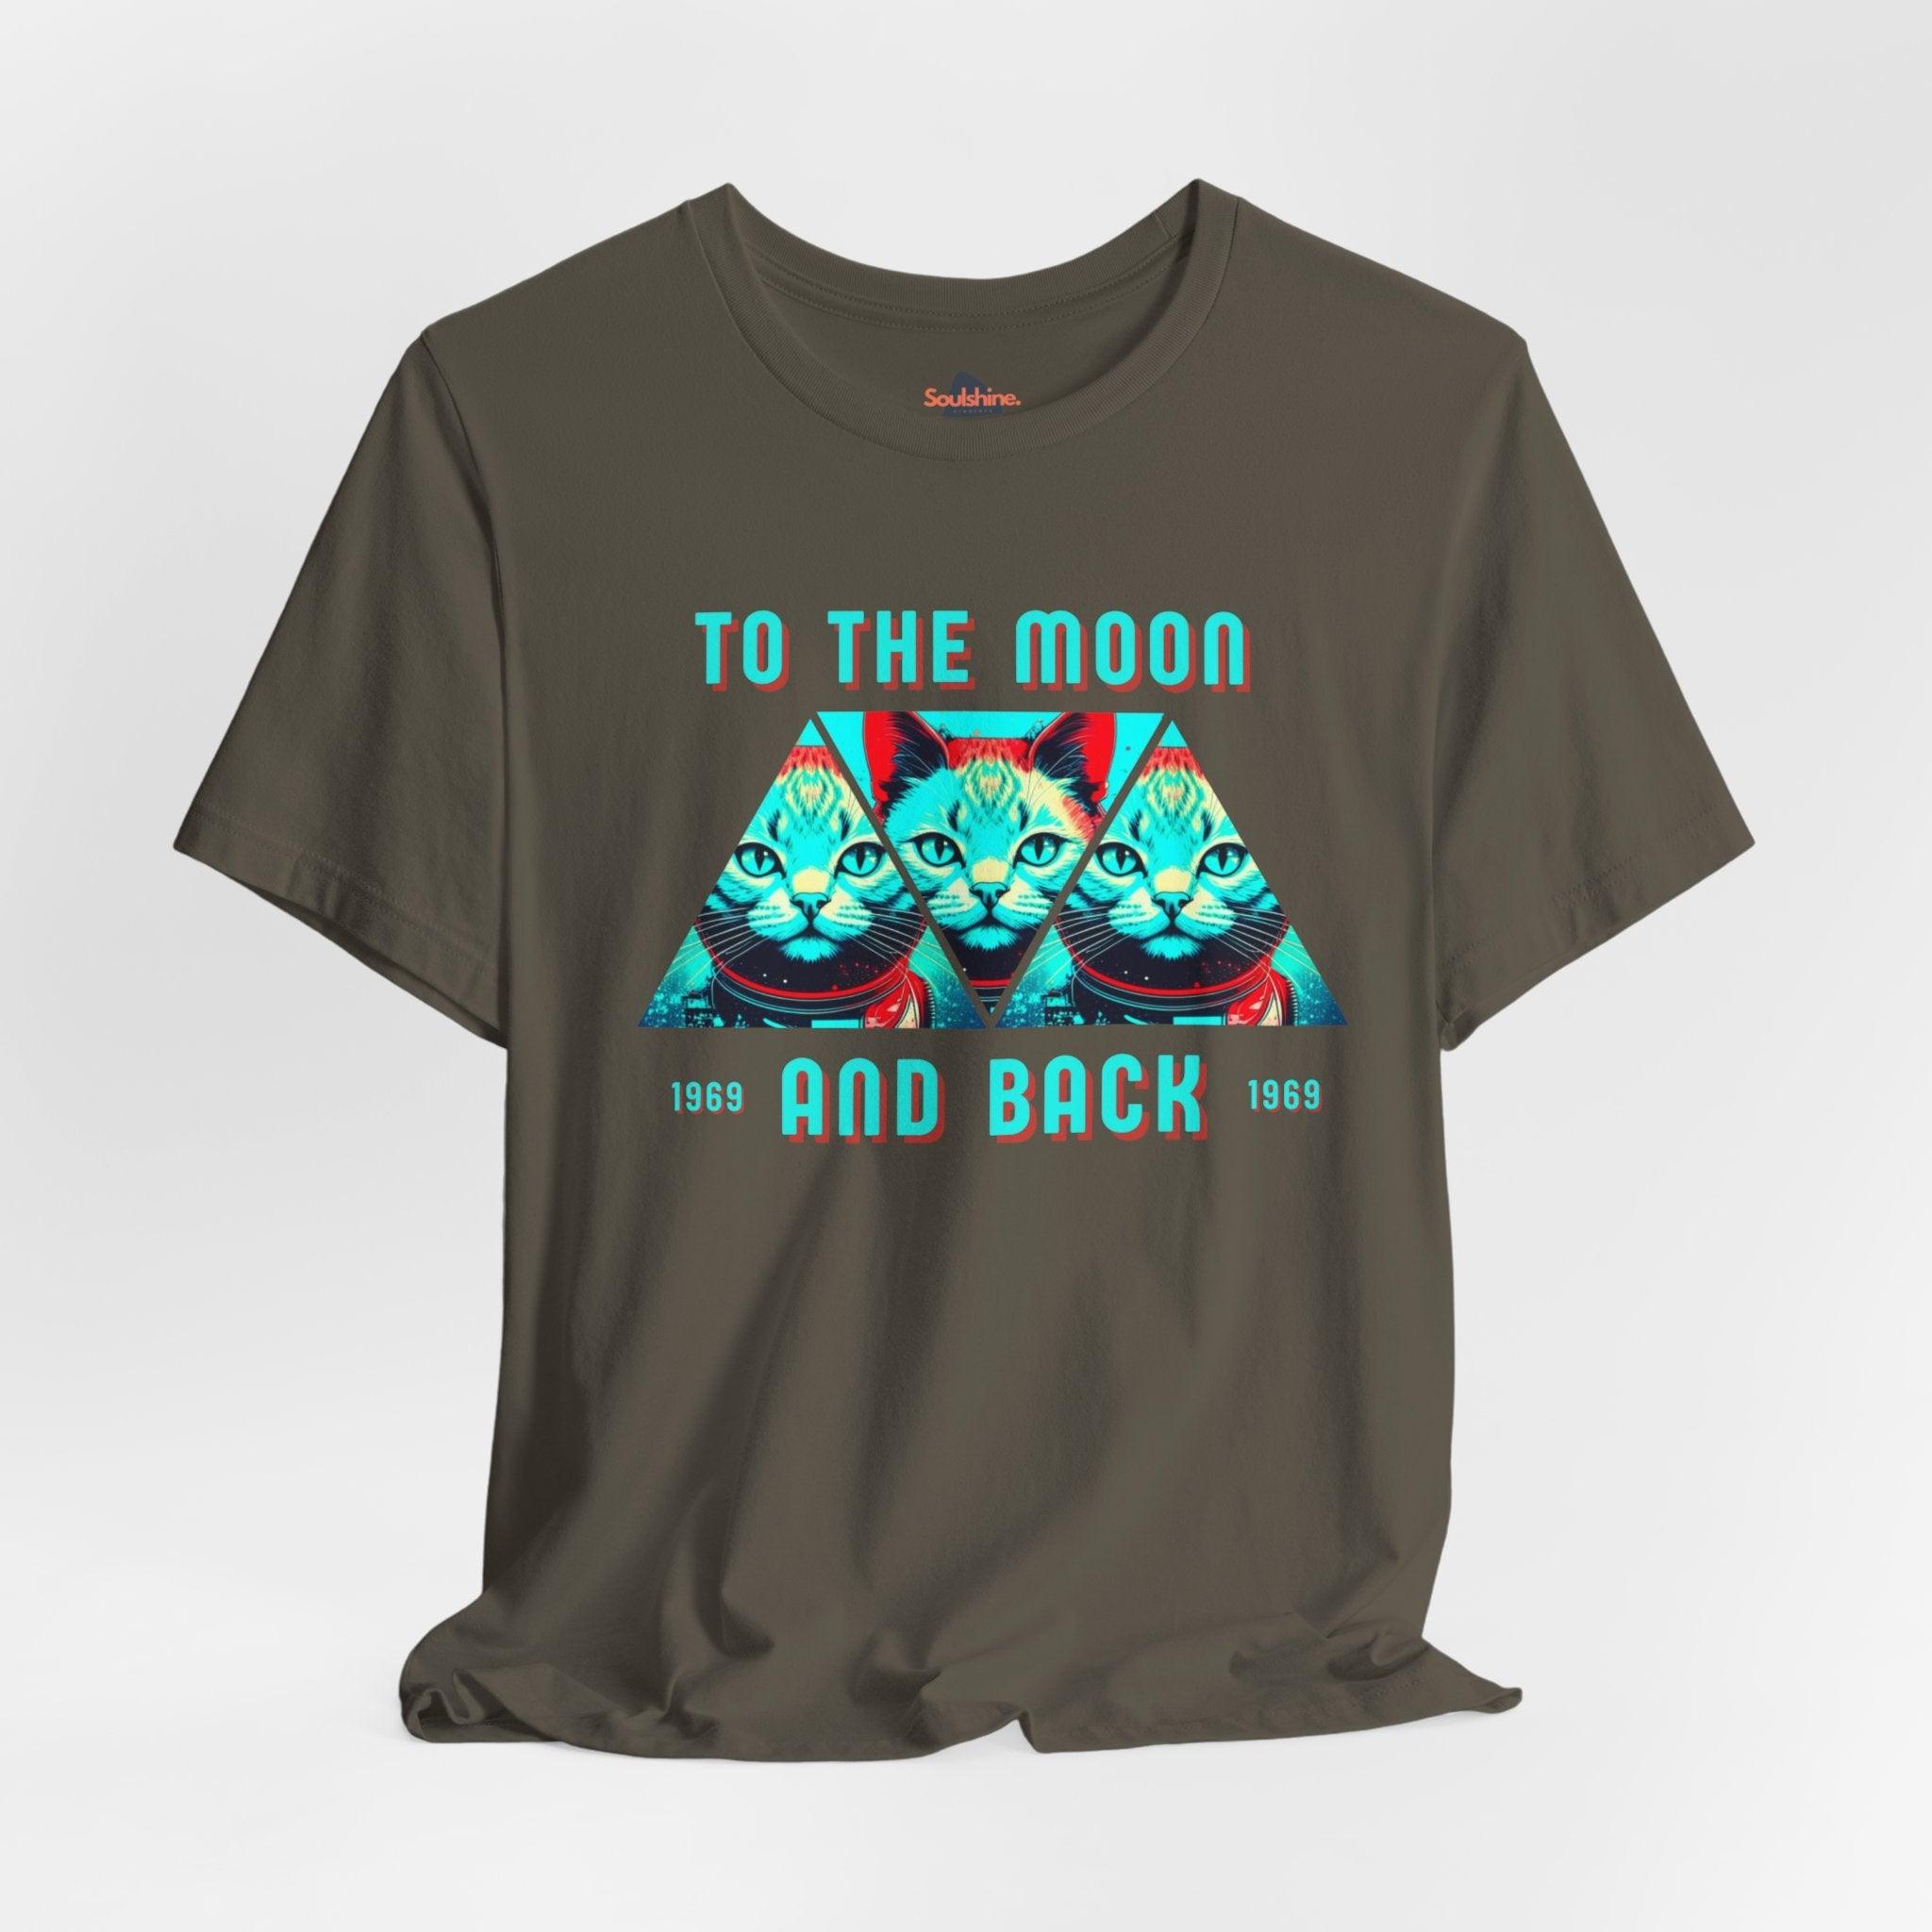 To the moon and back - Soulshinecreators - Unisex Jersey Short Sleeve Tee - US Army S T-Shirt by Soulshinecreators | Soulshinecreators